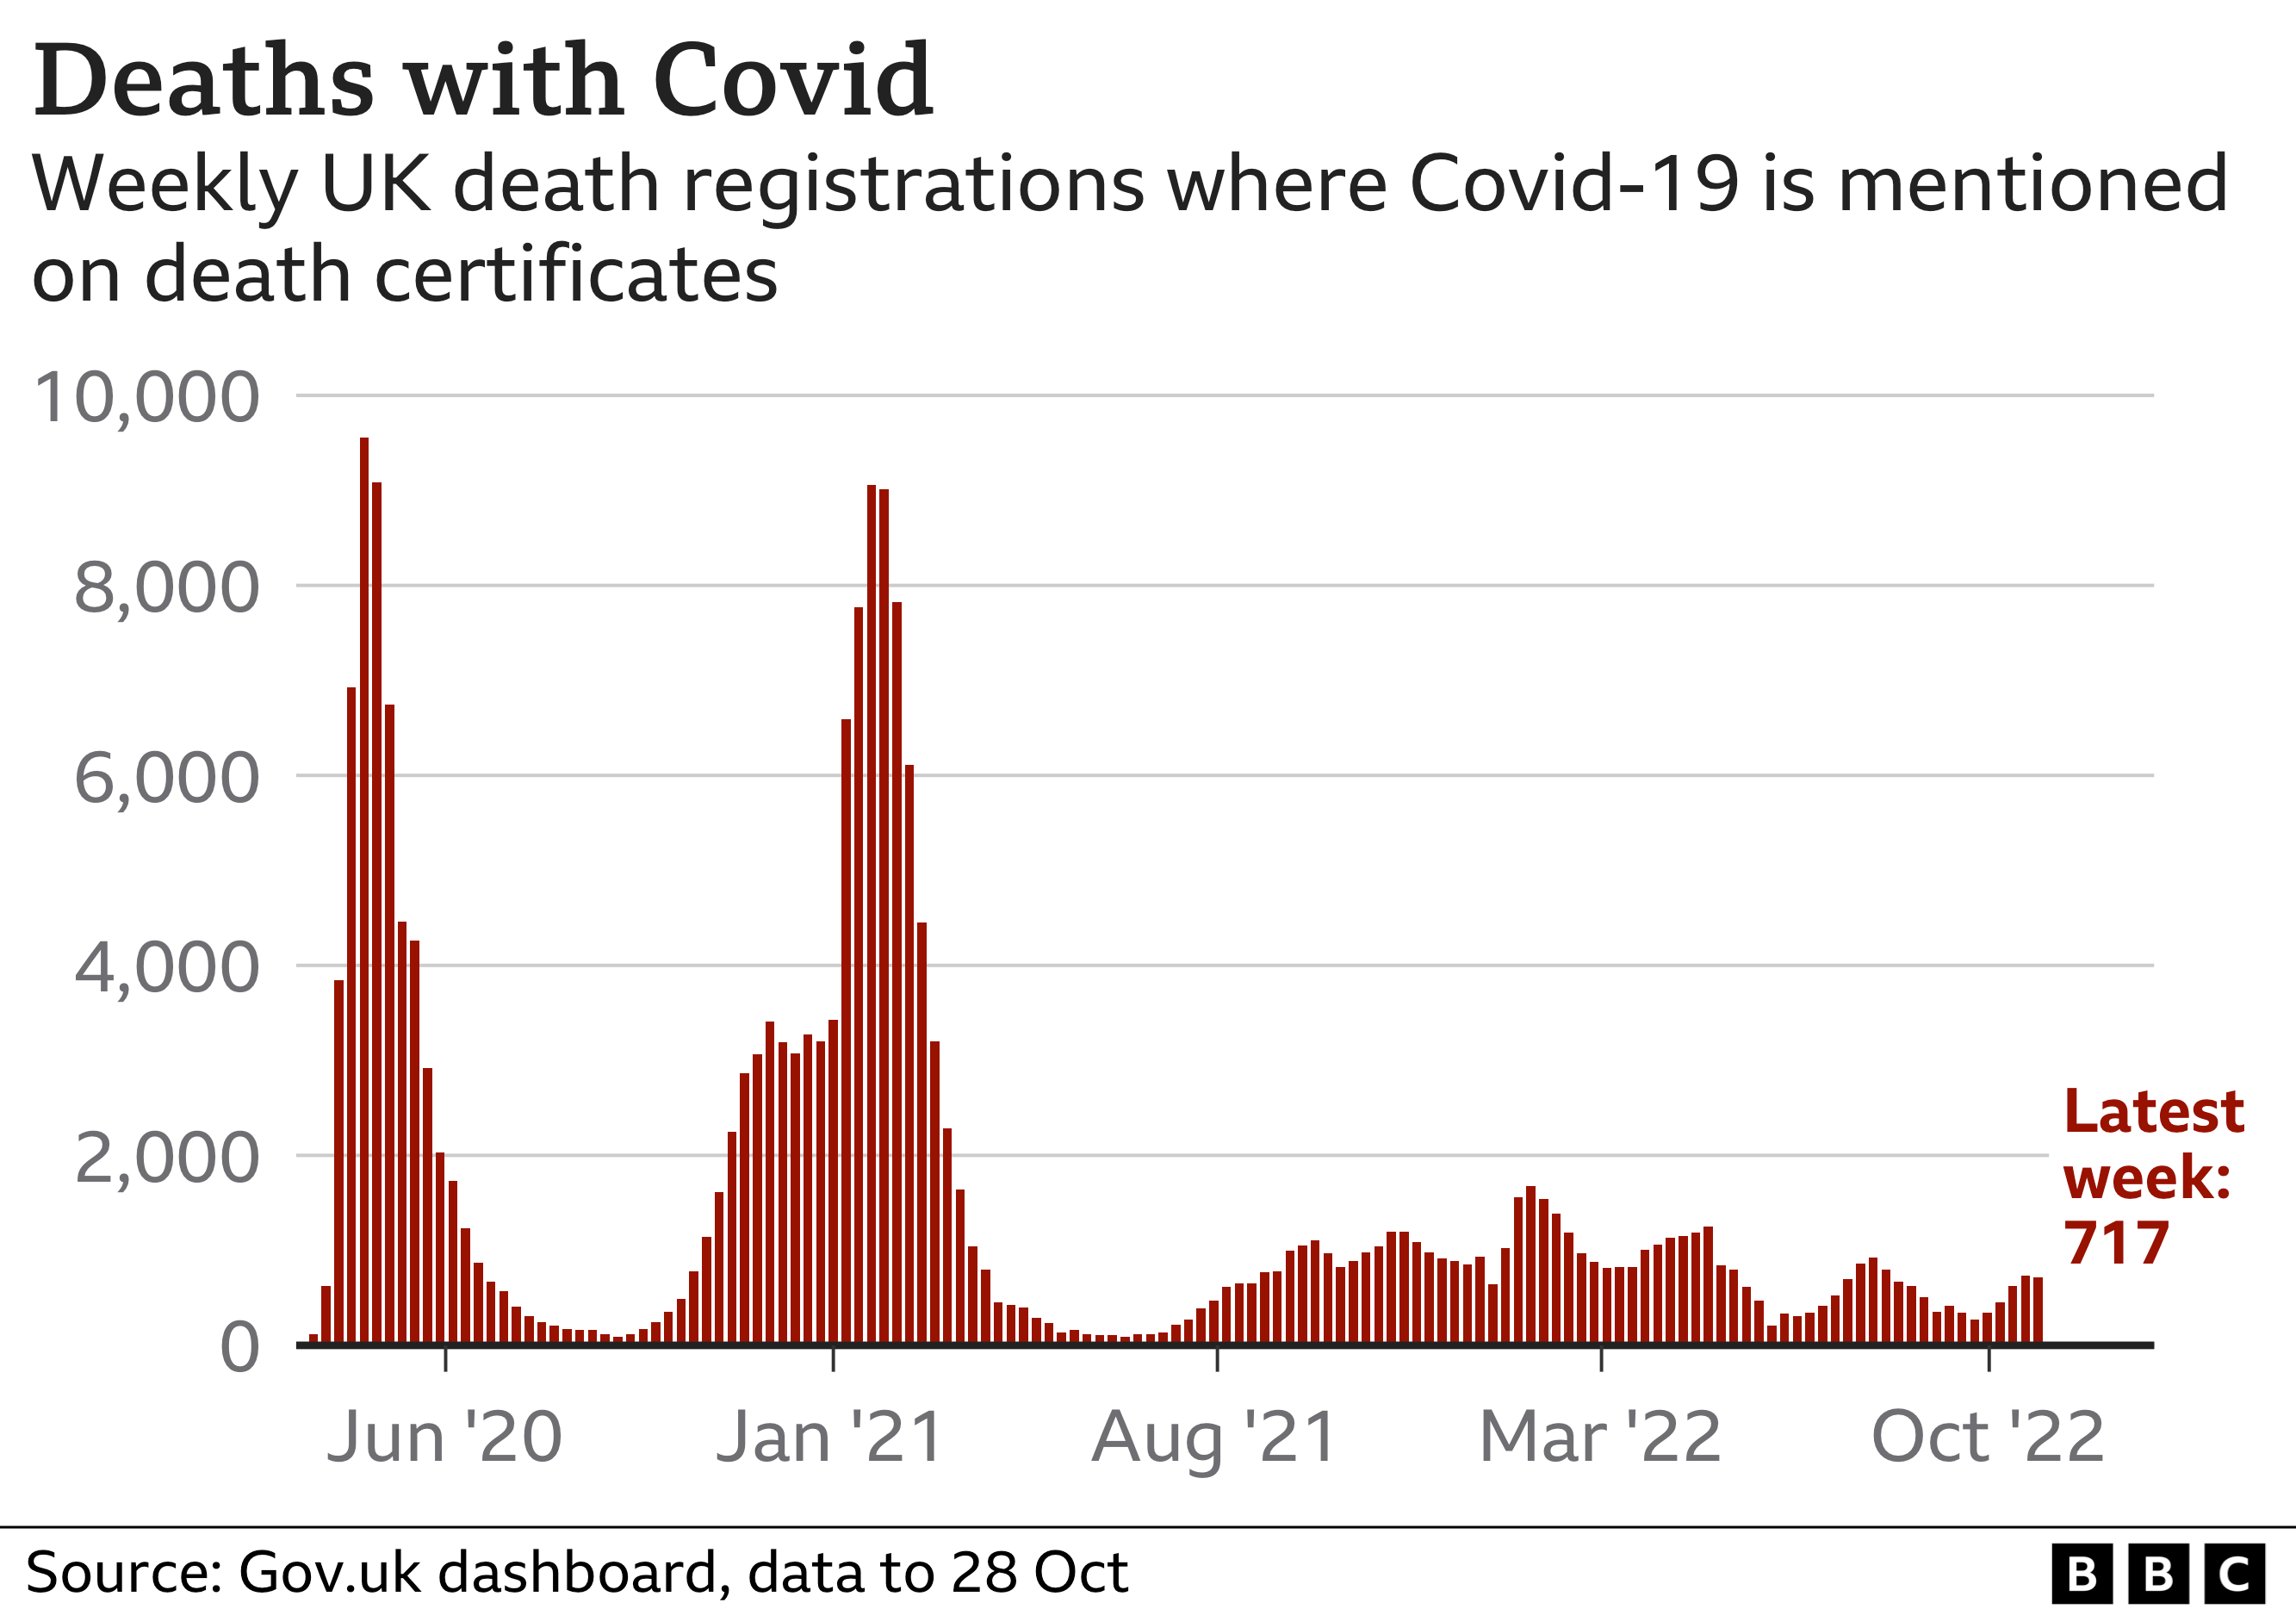 Chart showing weekly death registrations where Covid-19 was mentioned on the death certificate. Shows peaks in April 2020 of 9553. 9056 in late January 2021. 1673 in mid January 2022 and 1248 in late April 2022. The current weekly total is 717. Data 28 Oct